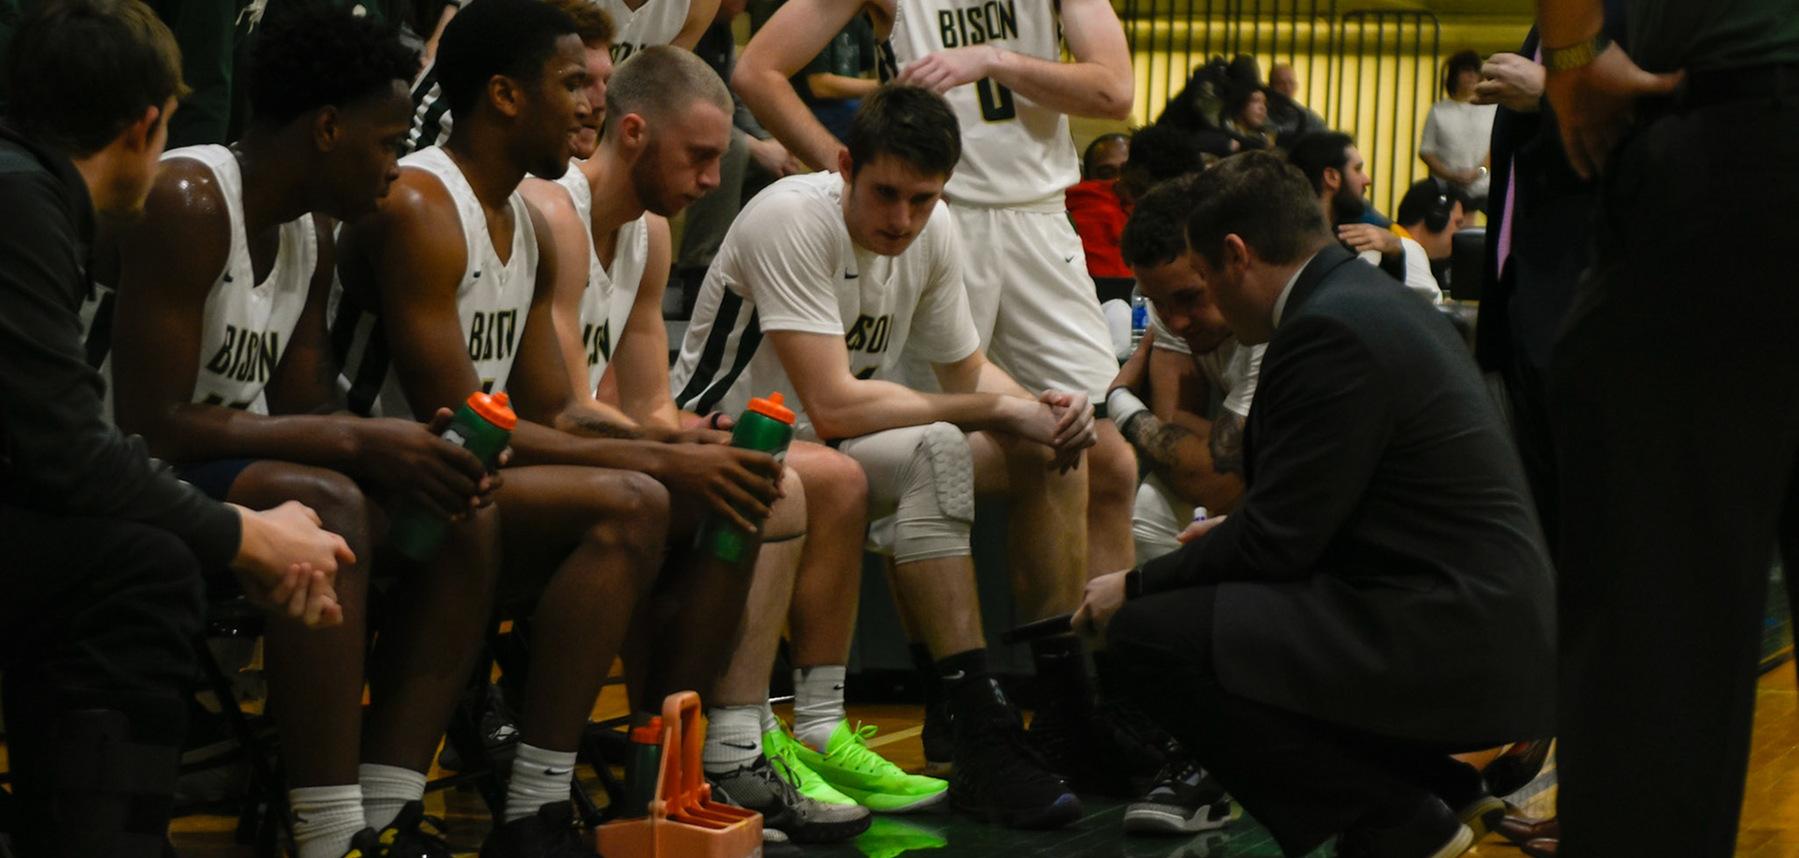 Men's Basketball Struggles Continue in Loss to Presidents